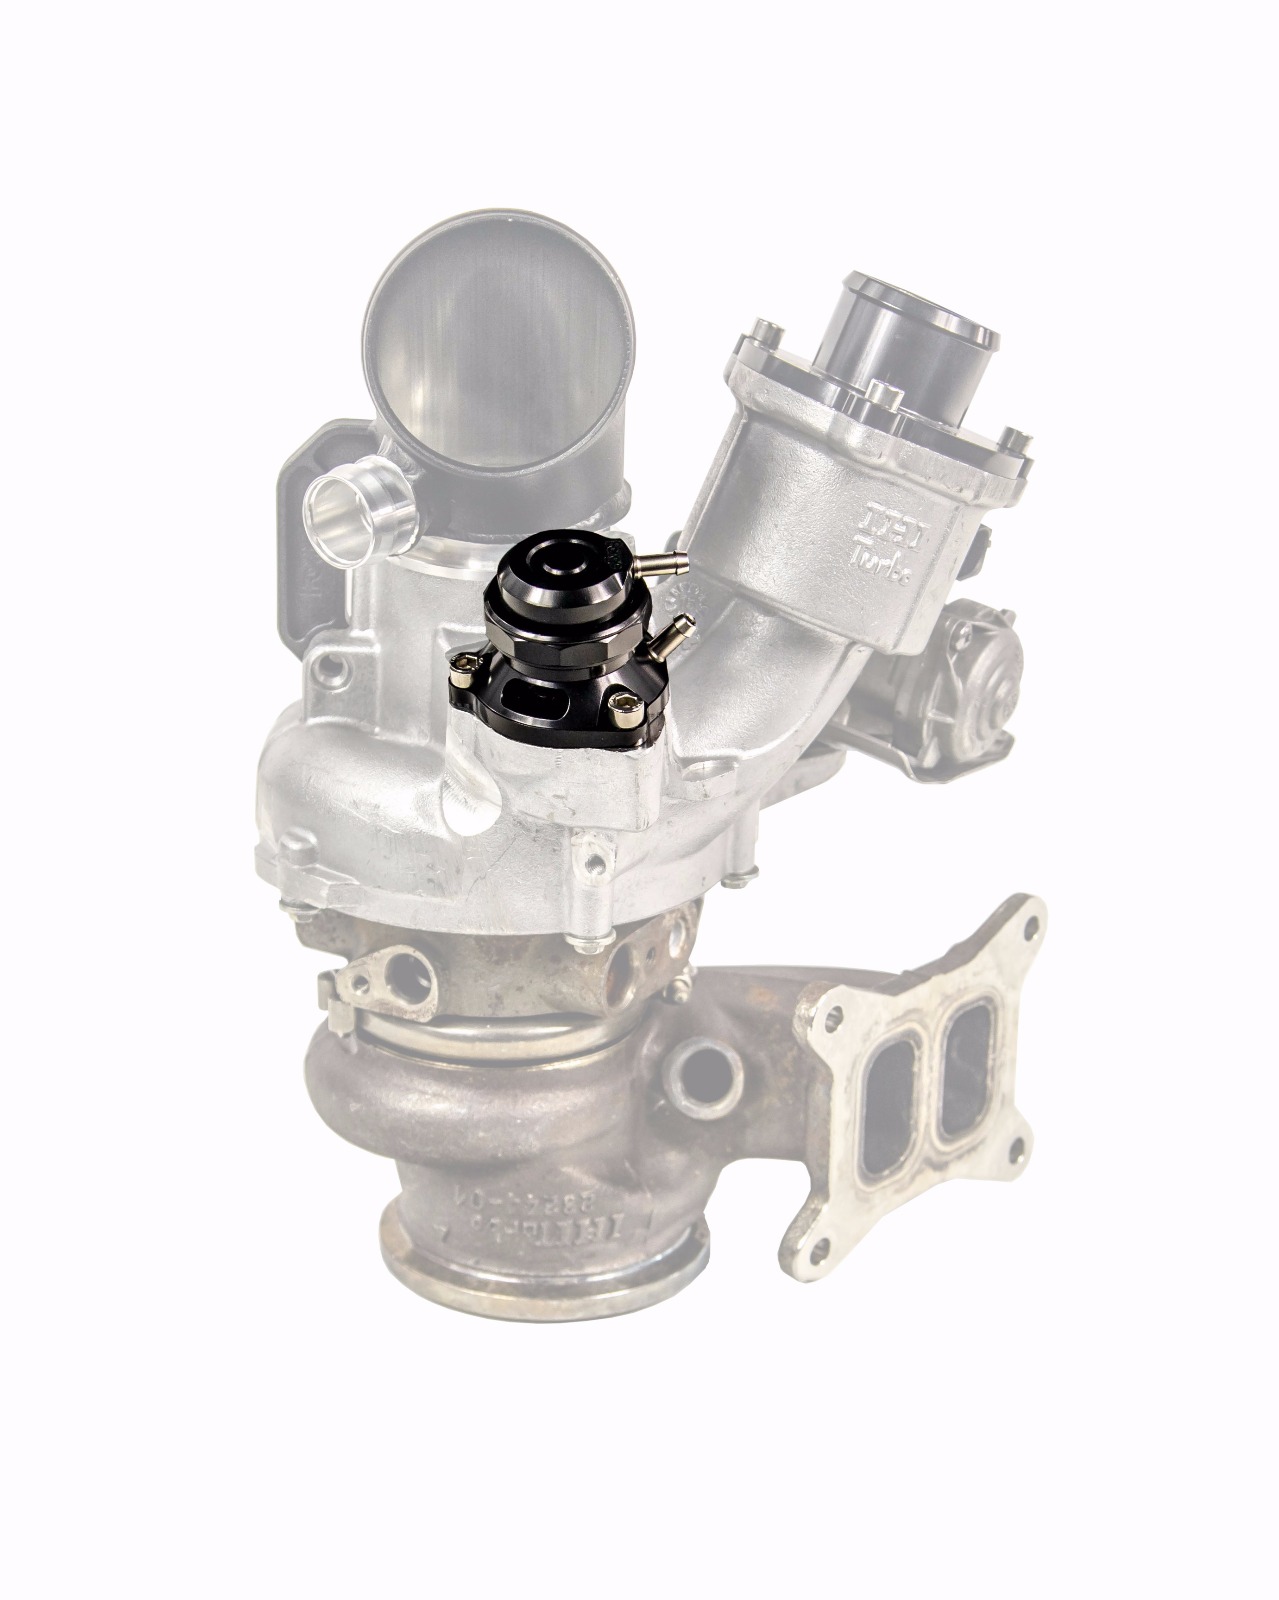 ECCPP Turbo Blow Off Valve Fit for 11-18 Audi A1 03-18 Audi A3 05-18 Audi A4 13-18 Audi A4 allroad 05-18 Audi A4 Quattro 12-18 Audi A6 12-18 Audi A6 Quattro 10-18 Audi Q5 04-18 Audi S3 06-14 Audi TT